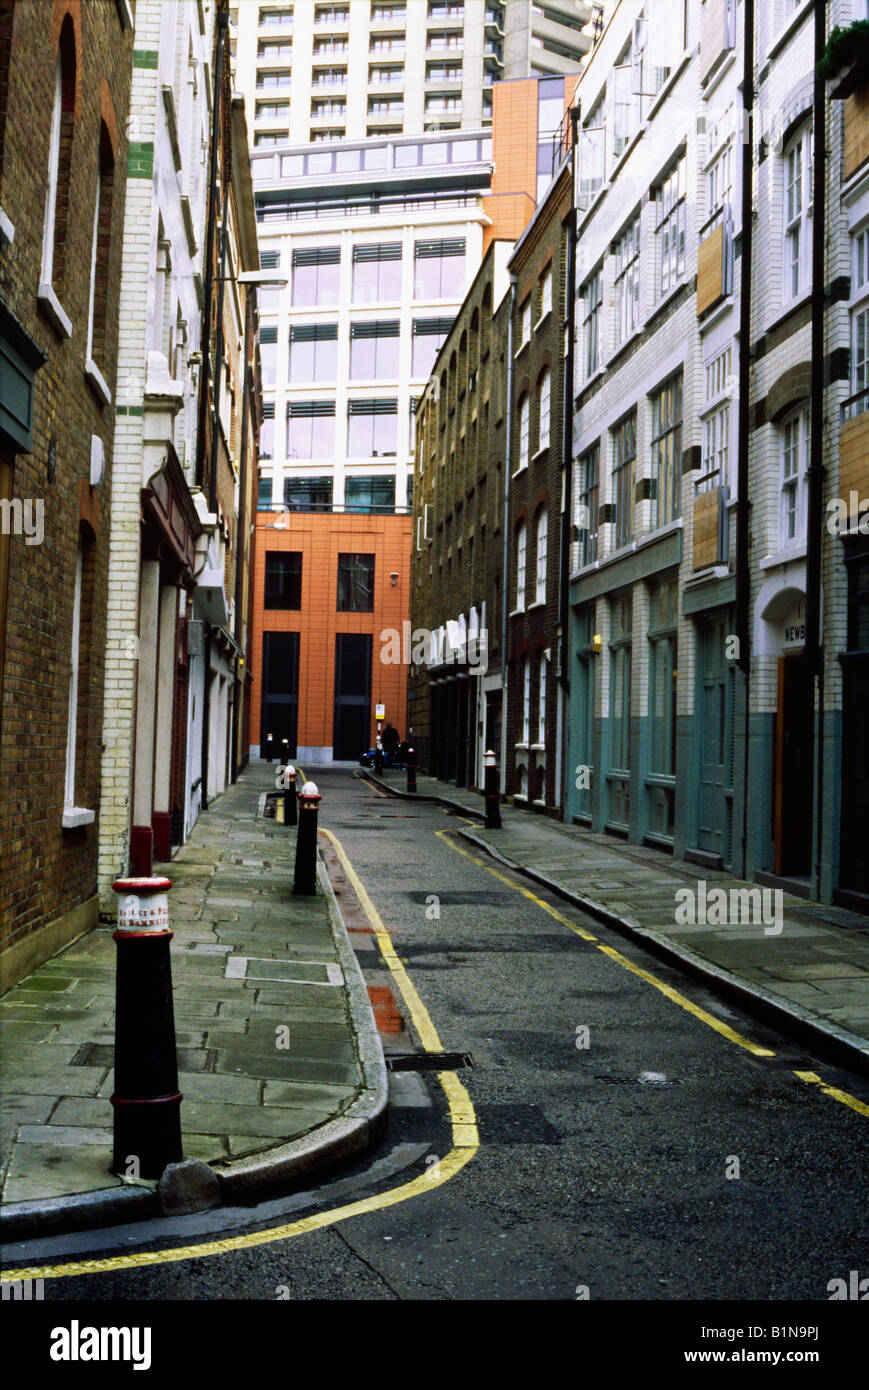 Narrow street in the City of London UK with old and new architecture Stock Photo